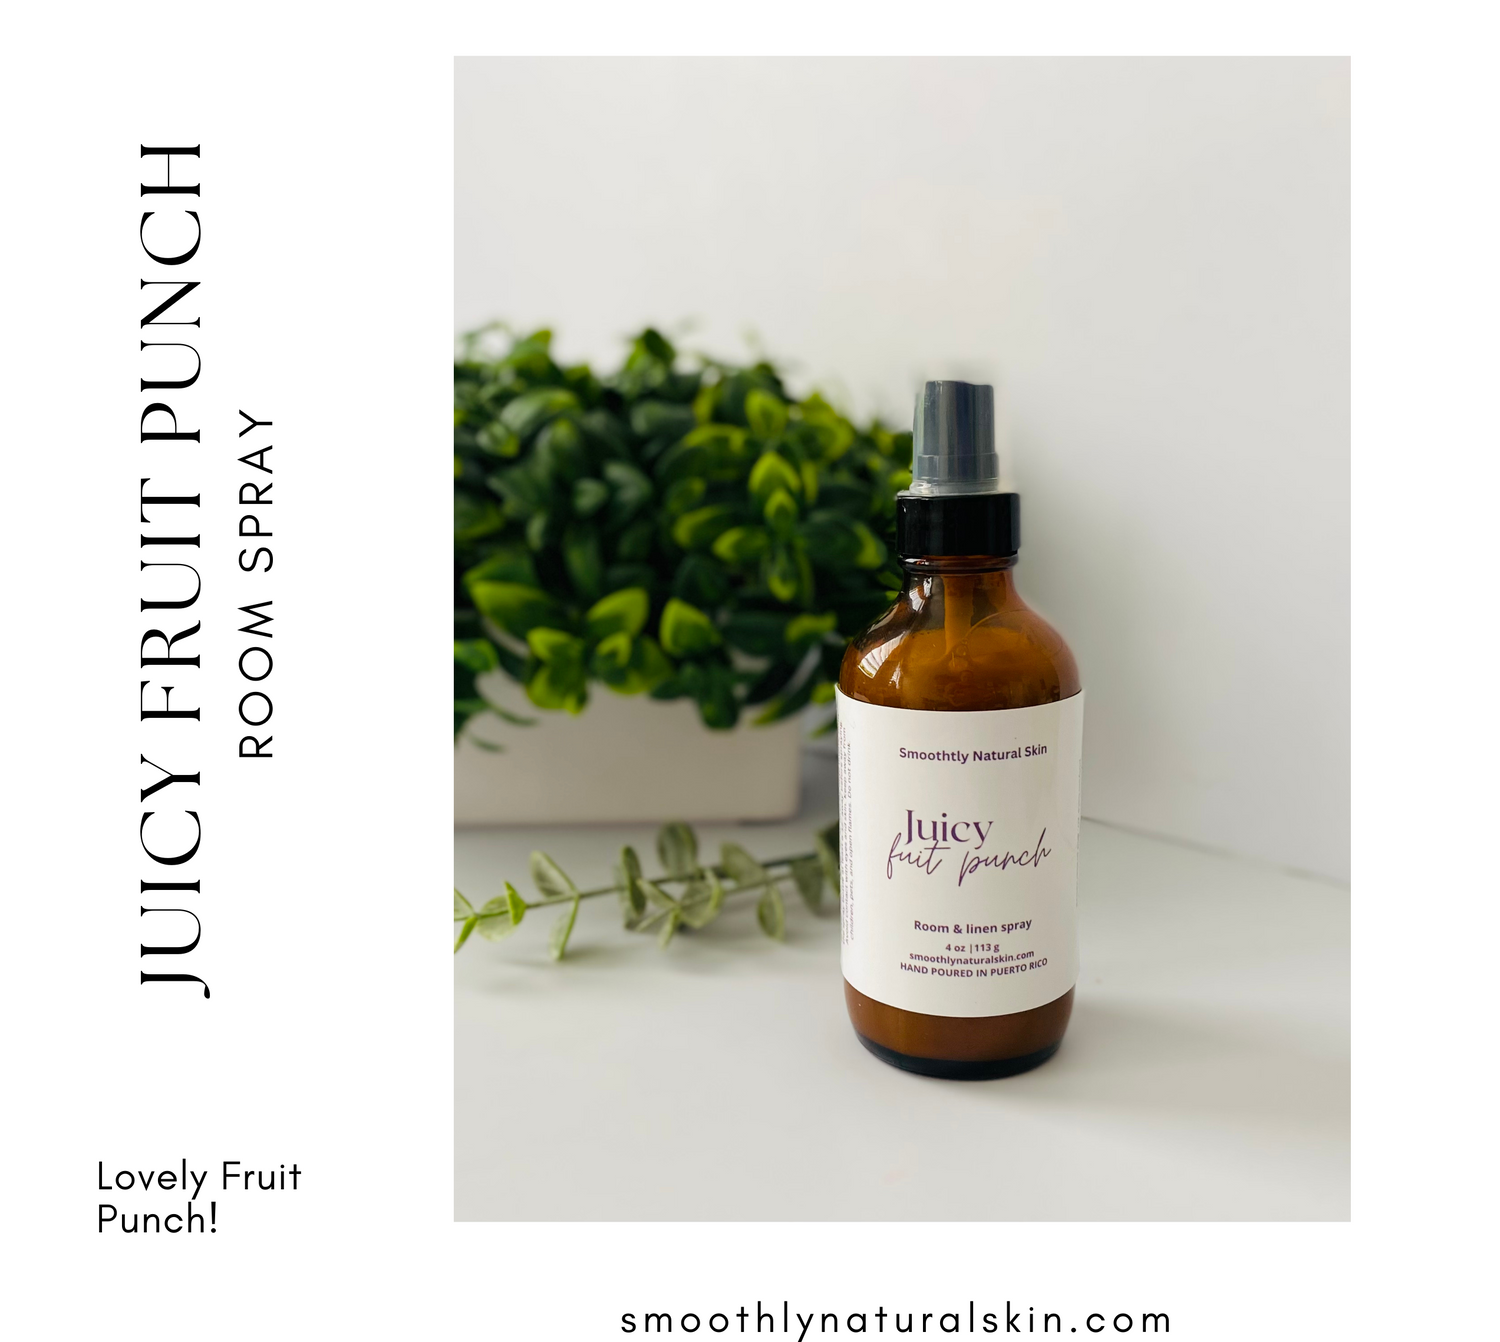 Juicy fruit punch room and linen spray has fresh citrus notes of lime and orange sparkle with effervescent highlights as they lead to a luscious blend of berry and cherry in this playful scent. Leafy green accents add intensity as a base of vanilla creates sweet tones for the fragrance.